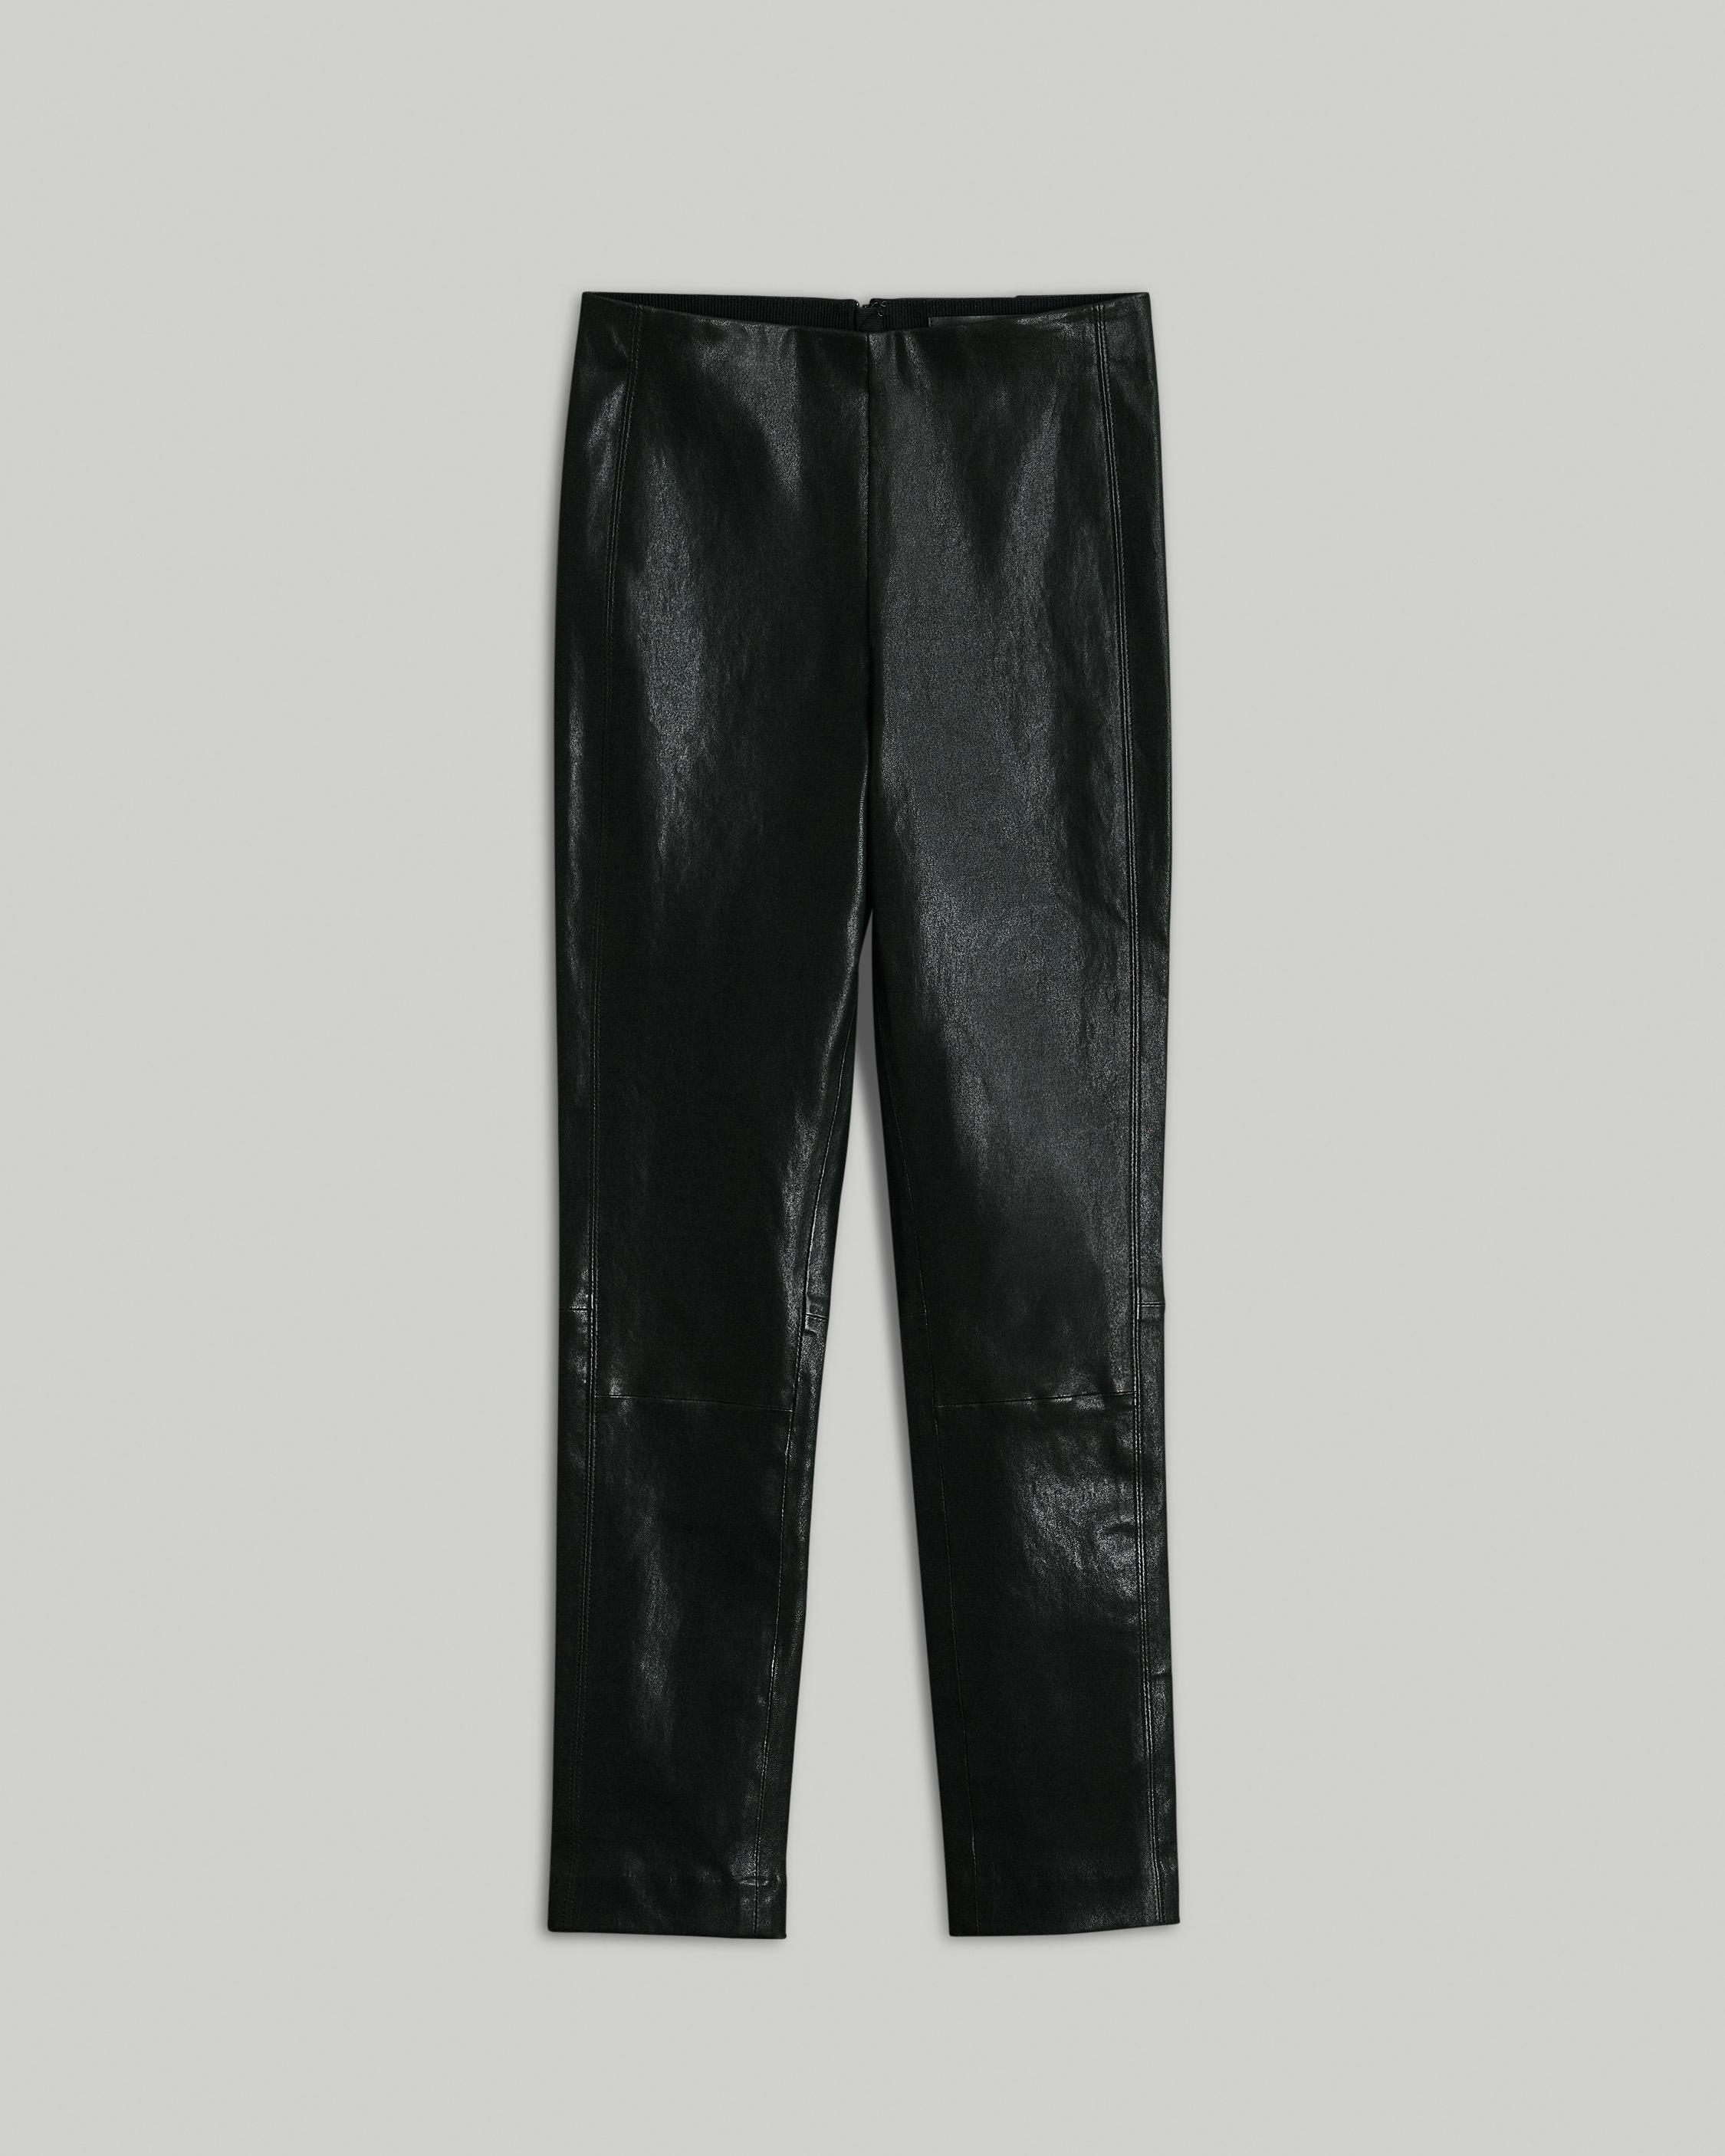 Simone Sport Pants with Ankle Zipper in Black